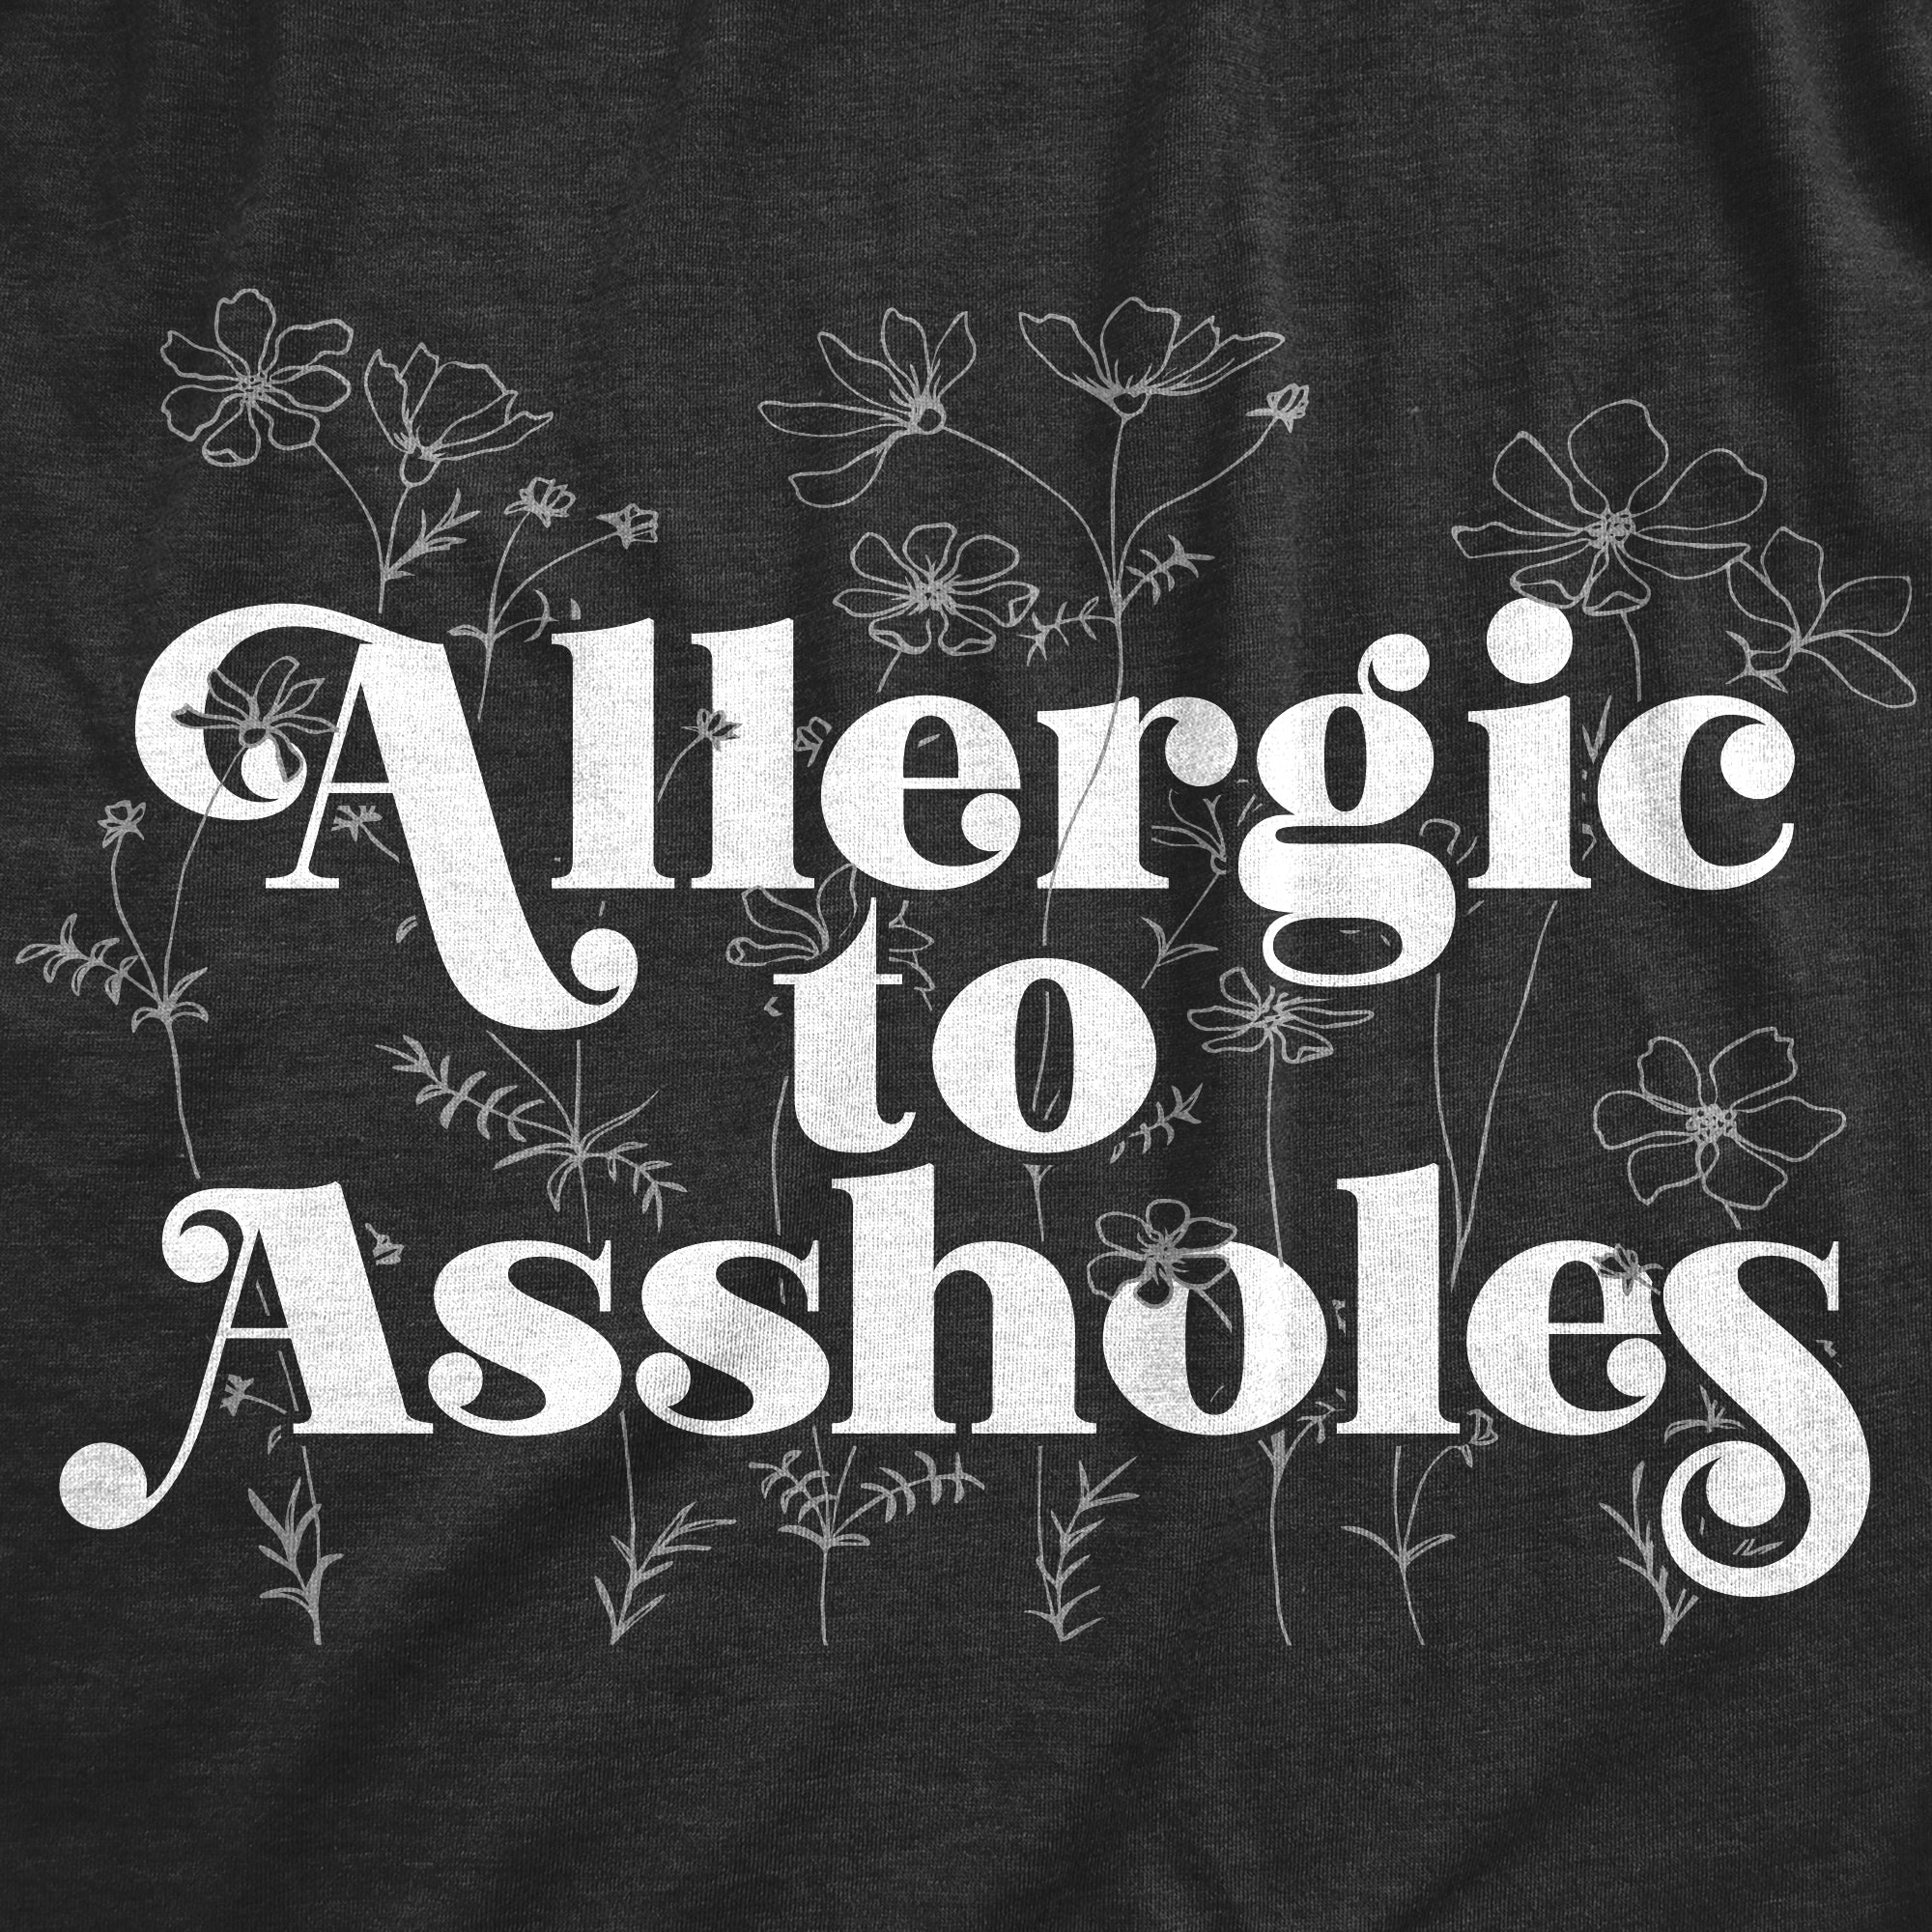 Funny Heather Black Allergic To Assholes Womens T Shirt Nerdy Sarcastic toilet Tee